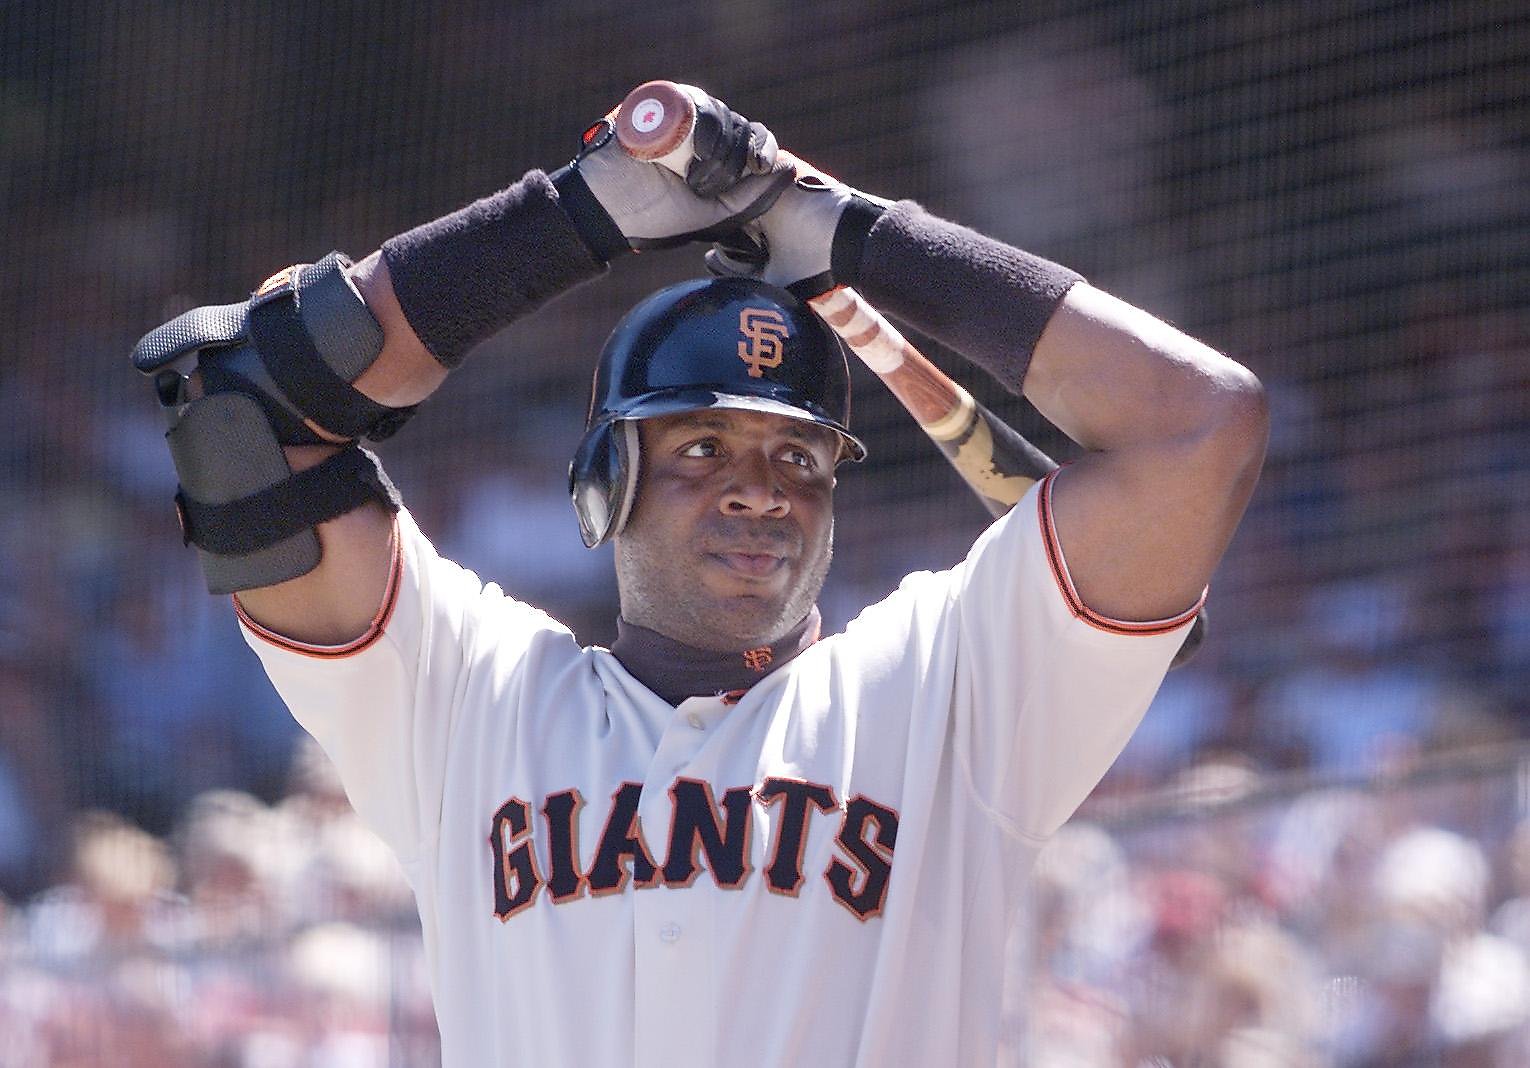 Barry Bonds says that he could've hit .400 if he bunted